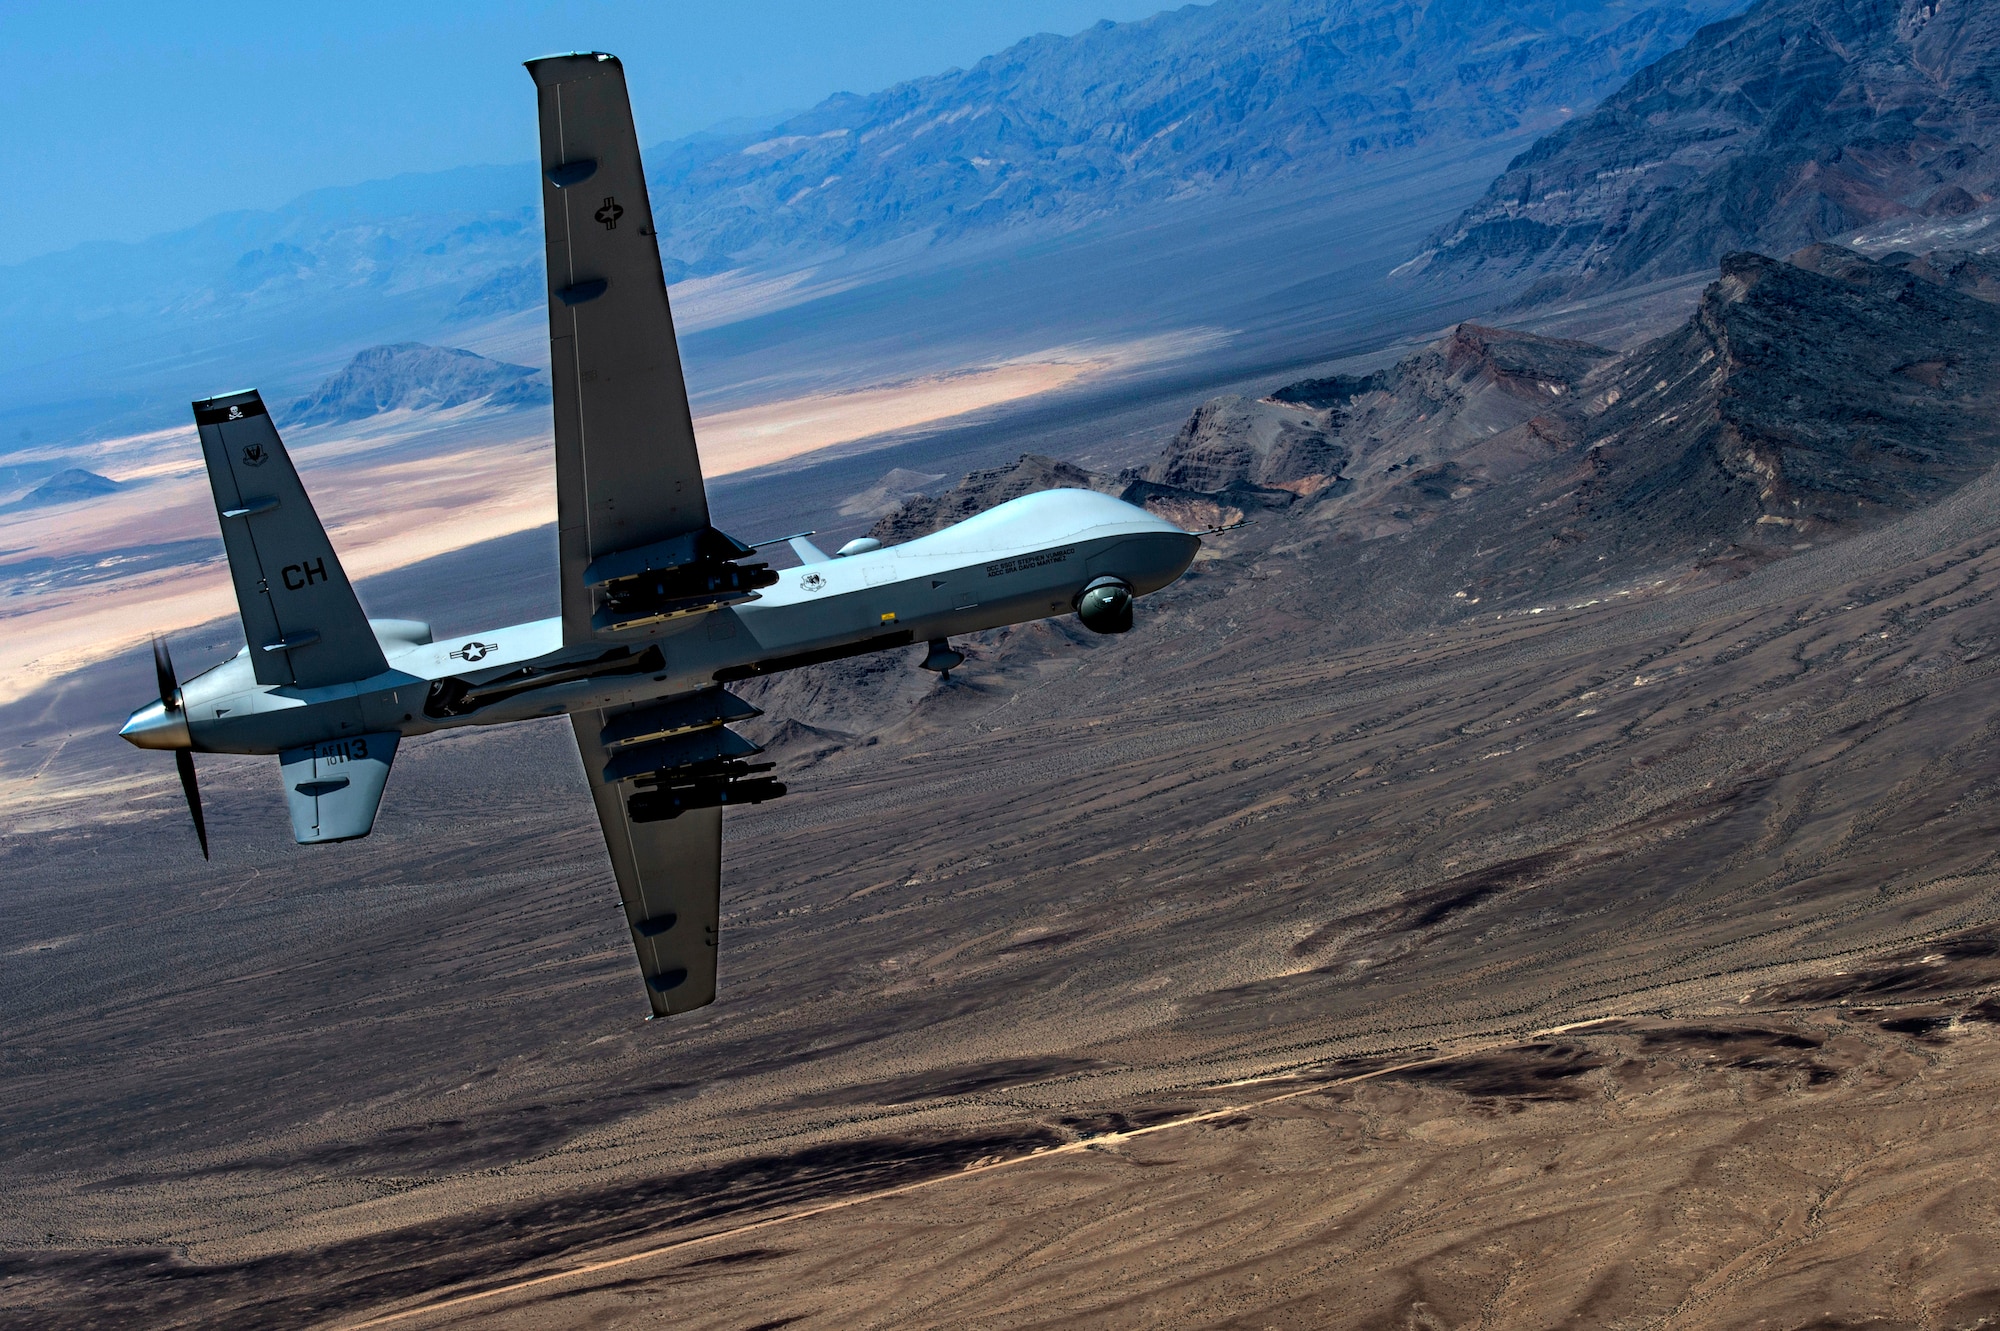 An MQ- Reaper remotely piloted aircraft performs aerial maneuvers over Creech Air Force Base, Nev., June 25, 2015. The MQ-9 Reaper is an armed, multi-mission, medium-altitude, long-endurance remotely piloted aircraft that is employed primarily as an intelligence-collection asset and secondarily against dynamic execution targets. (U.S. Air Force photo by Senior Airman Cory D. Payne/Released)